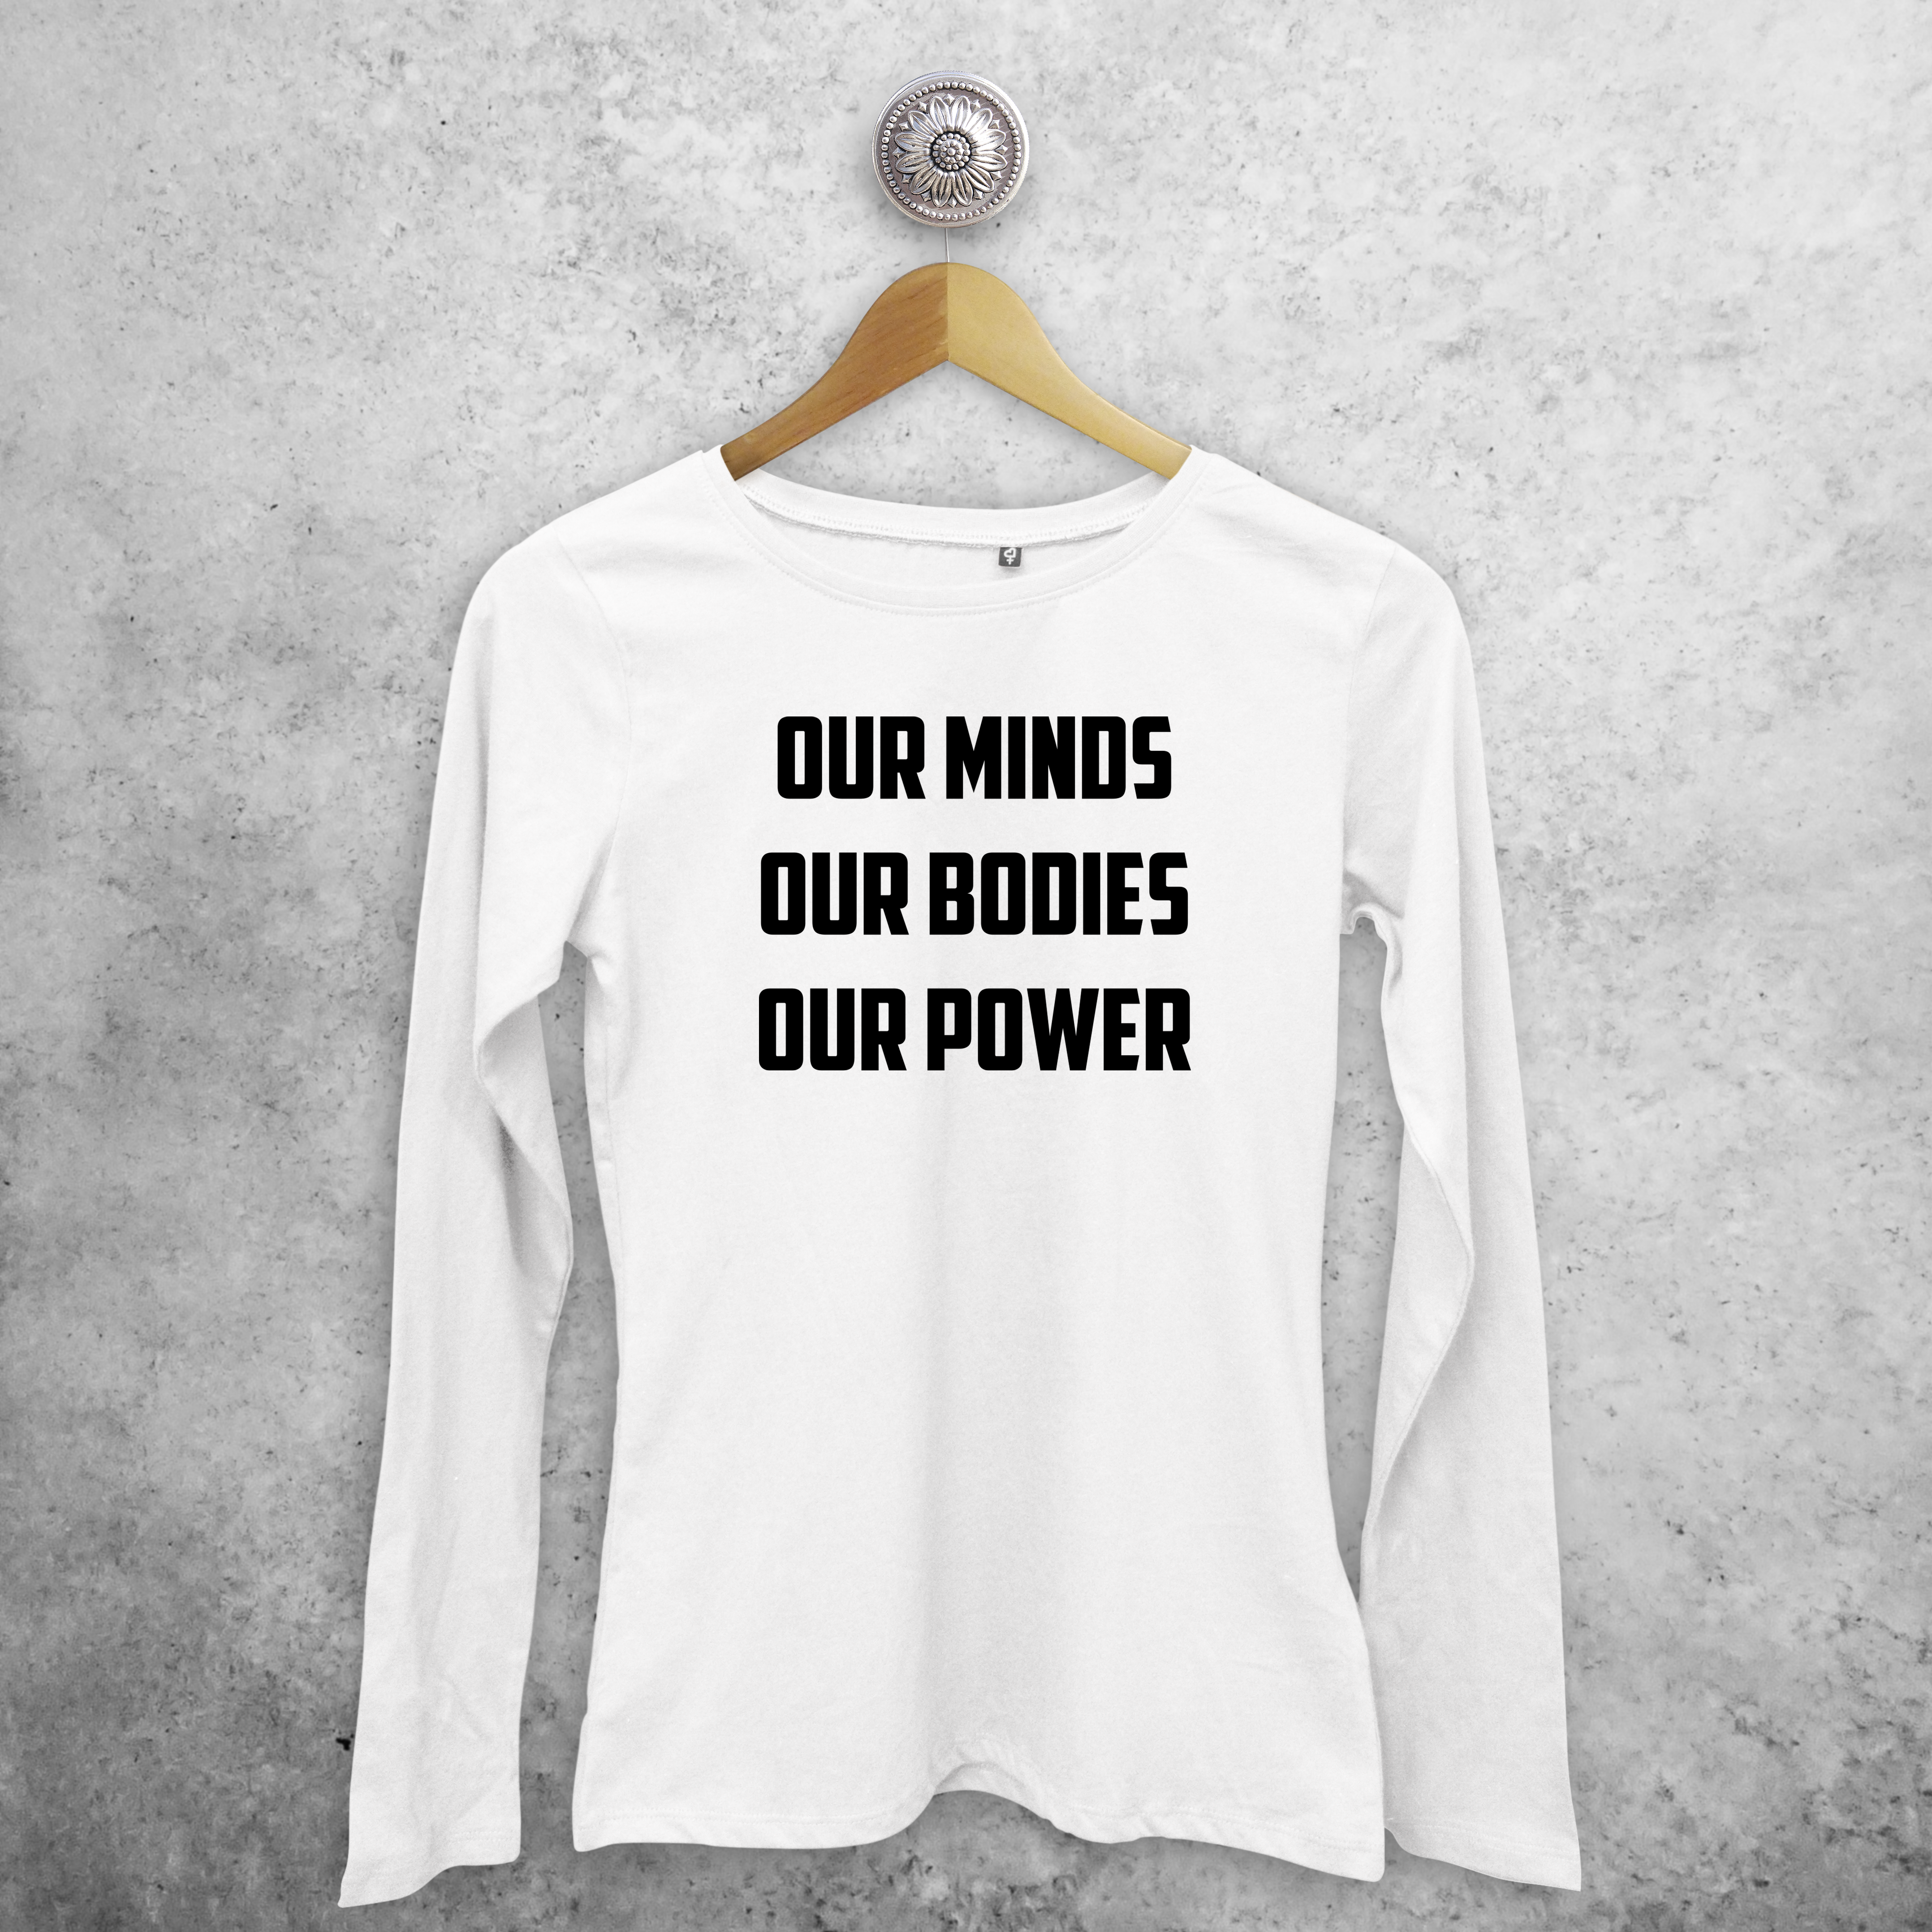 'Our minds, Our bodies, Our power' adult longsleeve shirt